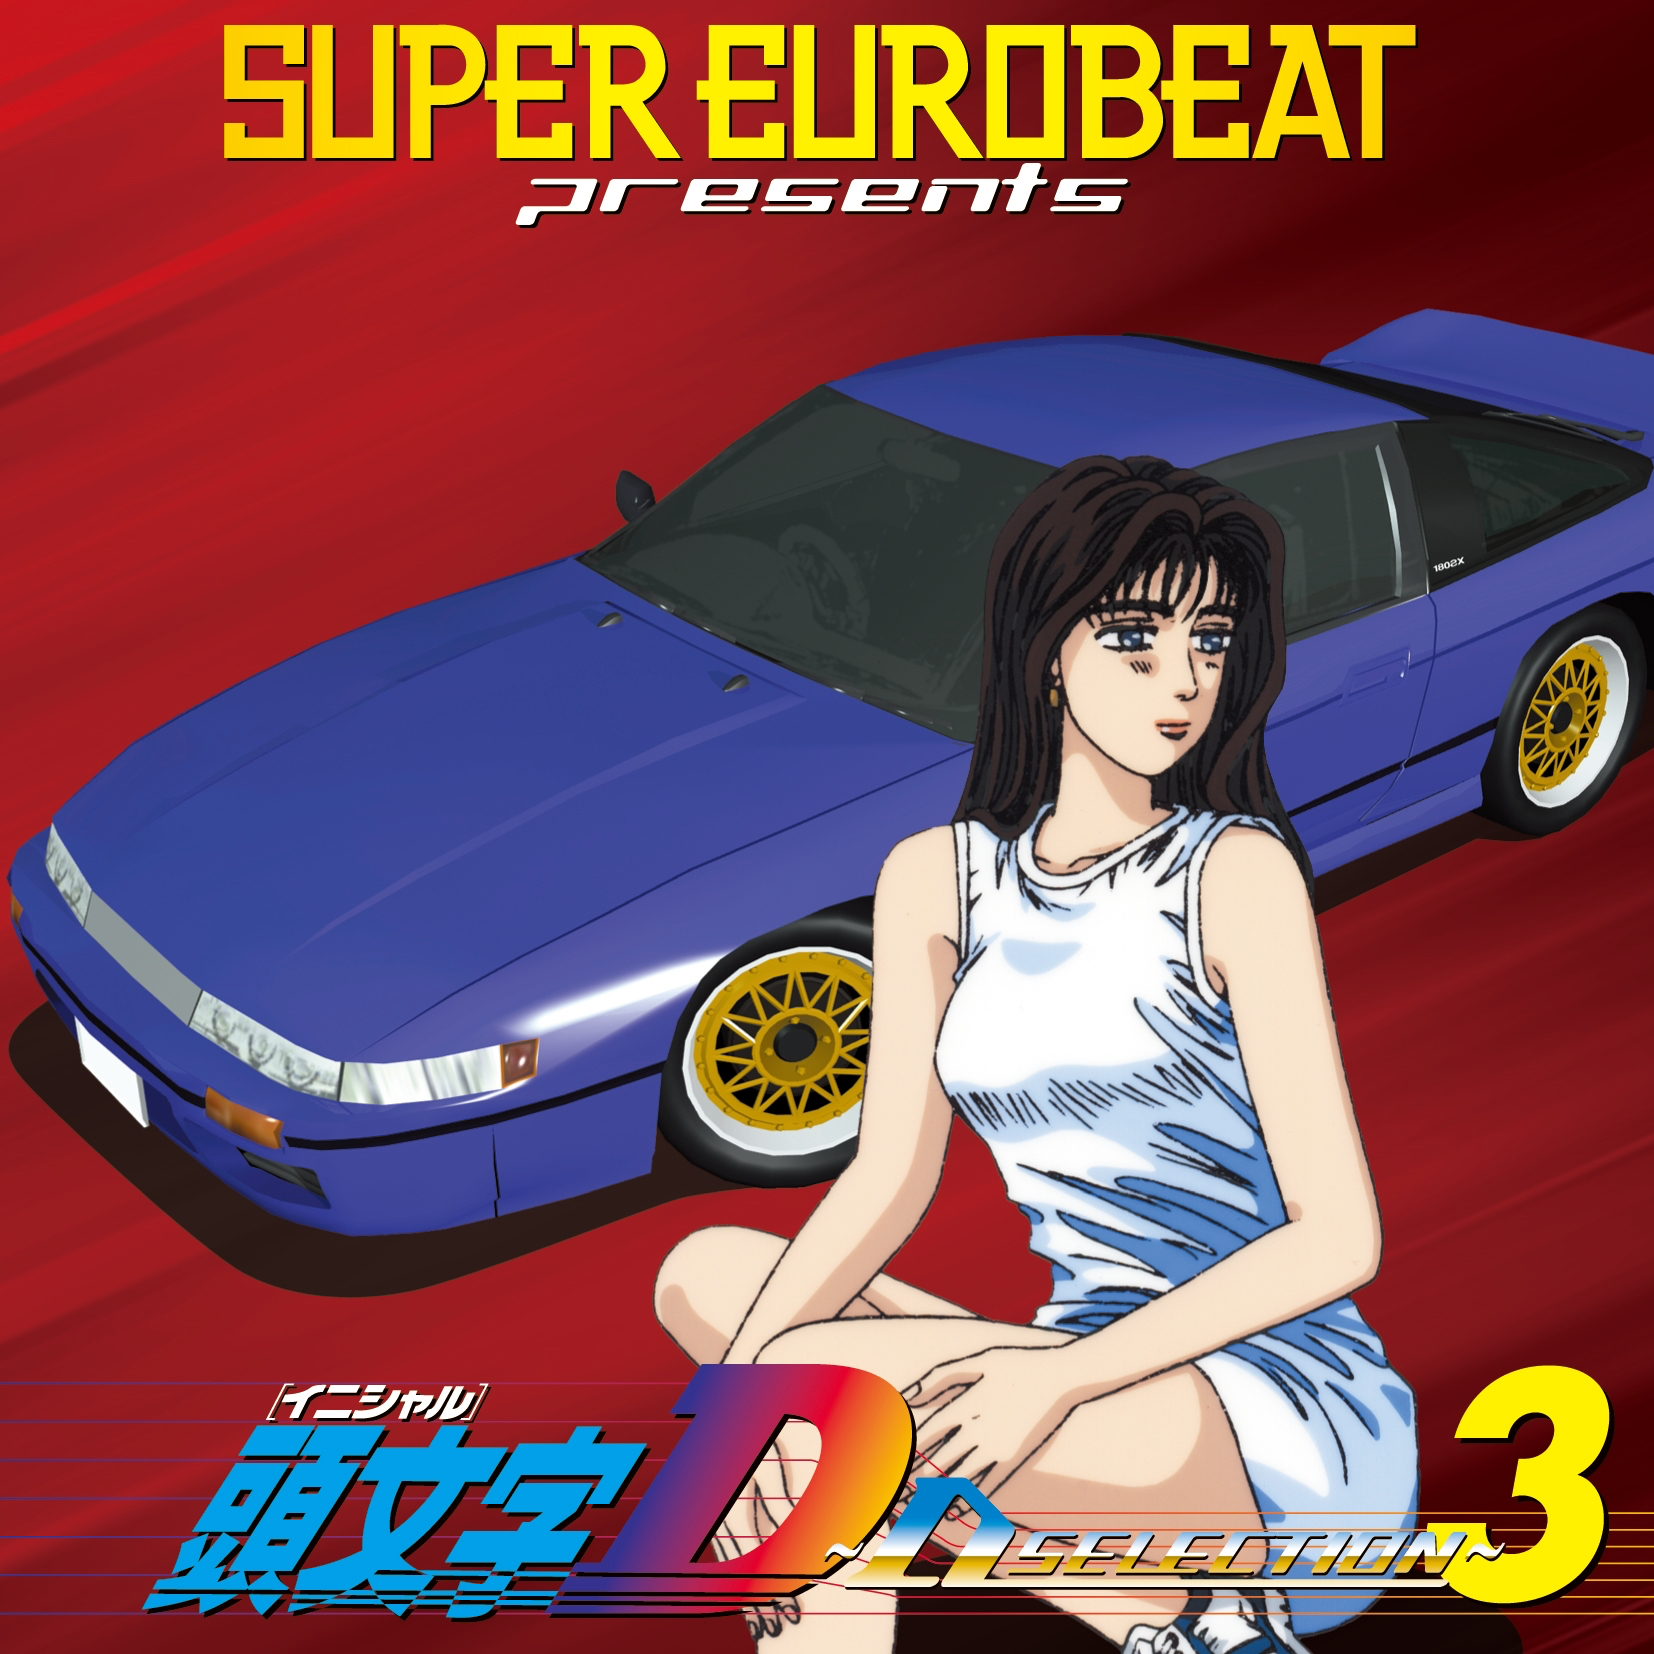 Initial D First Stage (English Dub) Challenge From the Superstar